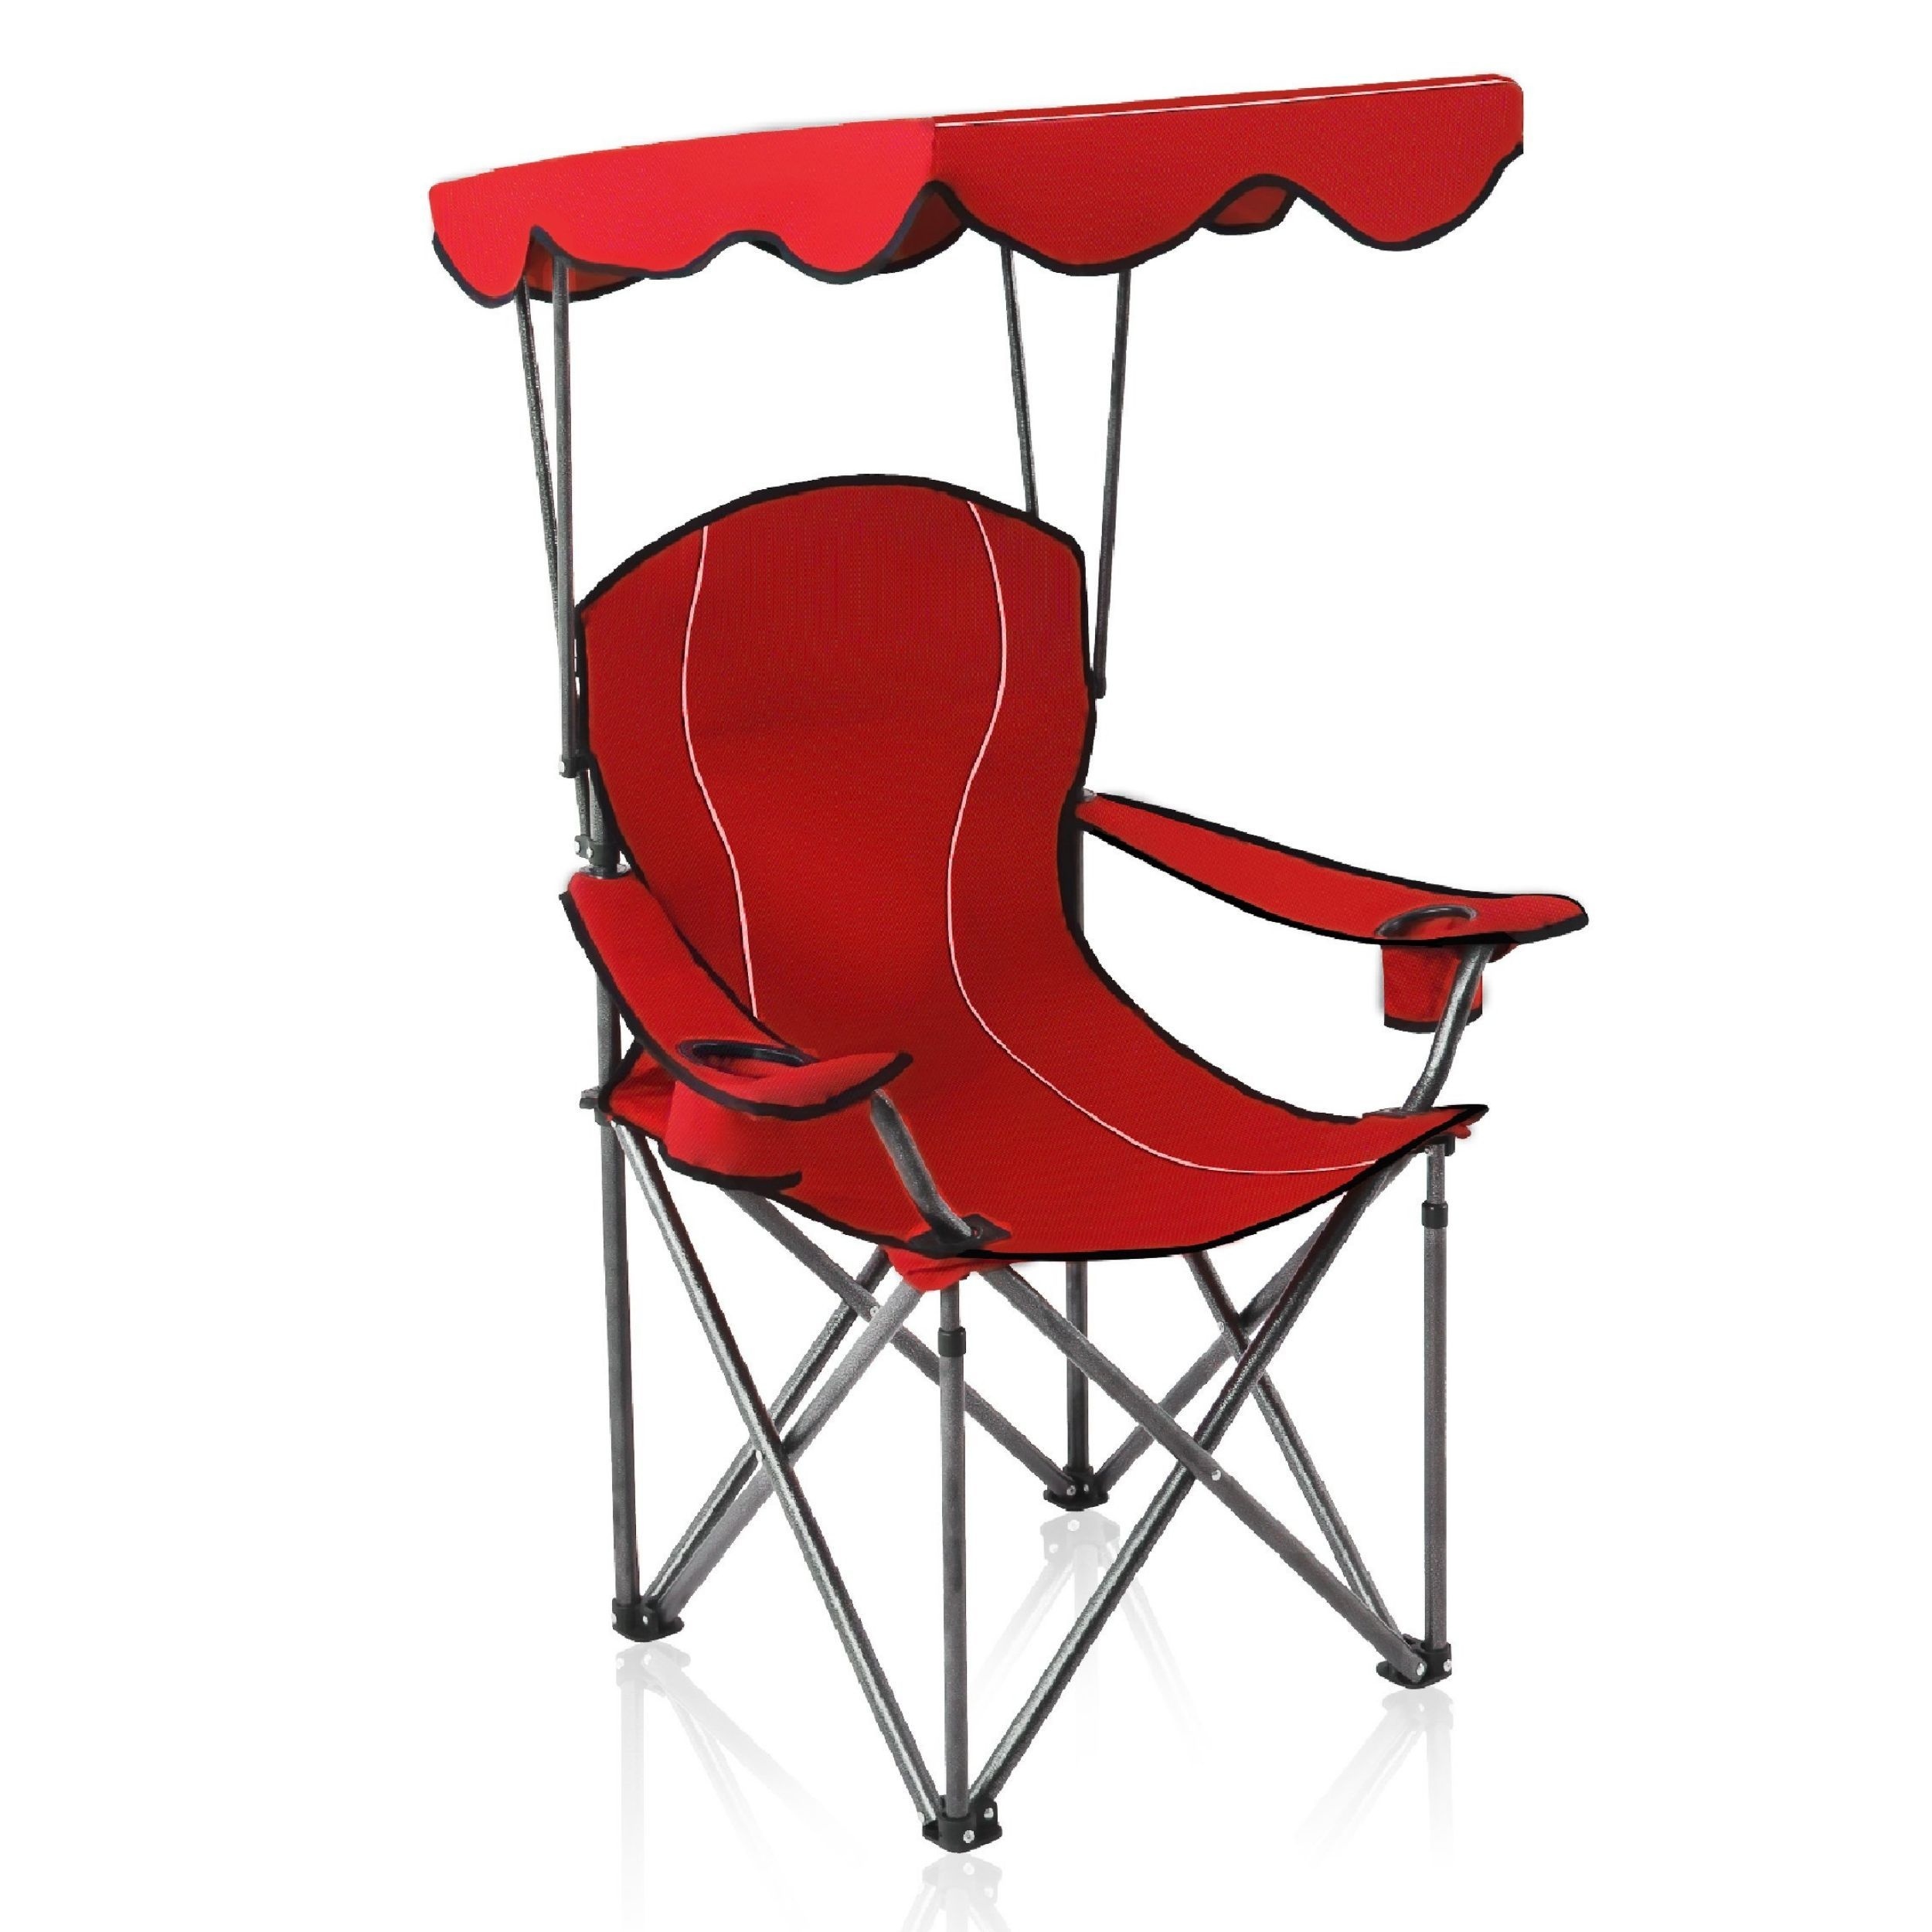 

Mix Patio Camp Chairs With Shade Canopy Chair Folding Camping Recliner Support 350 Lbs